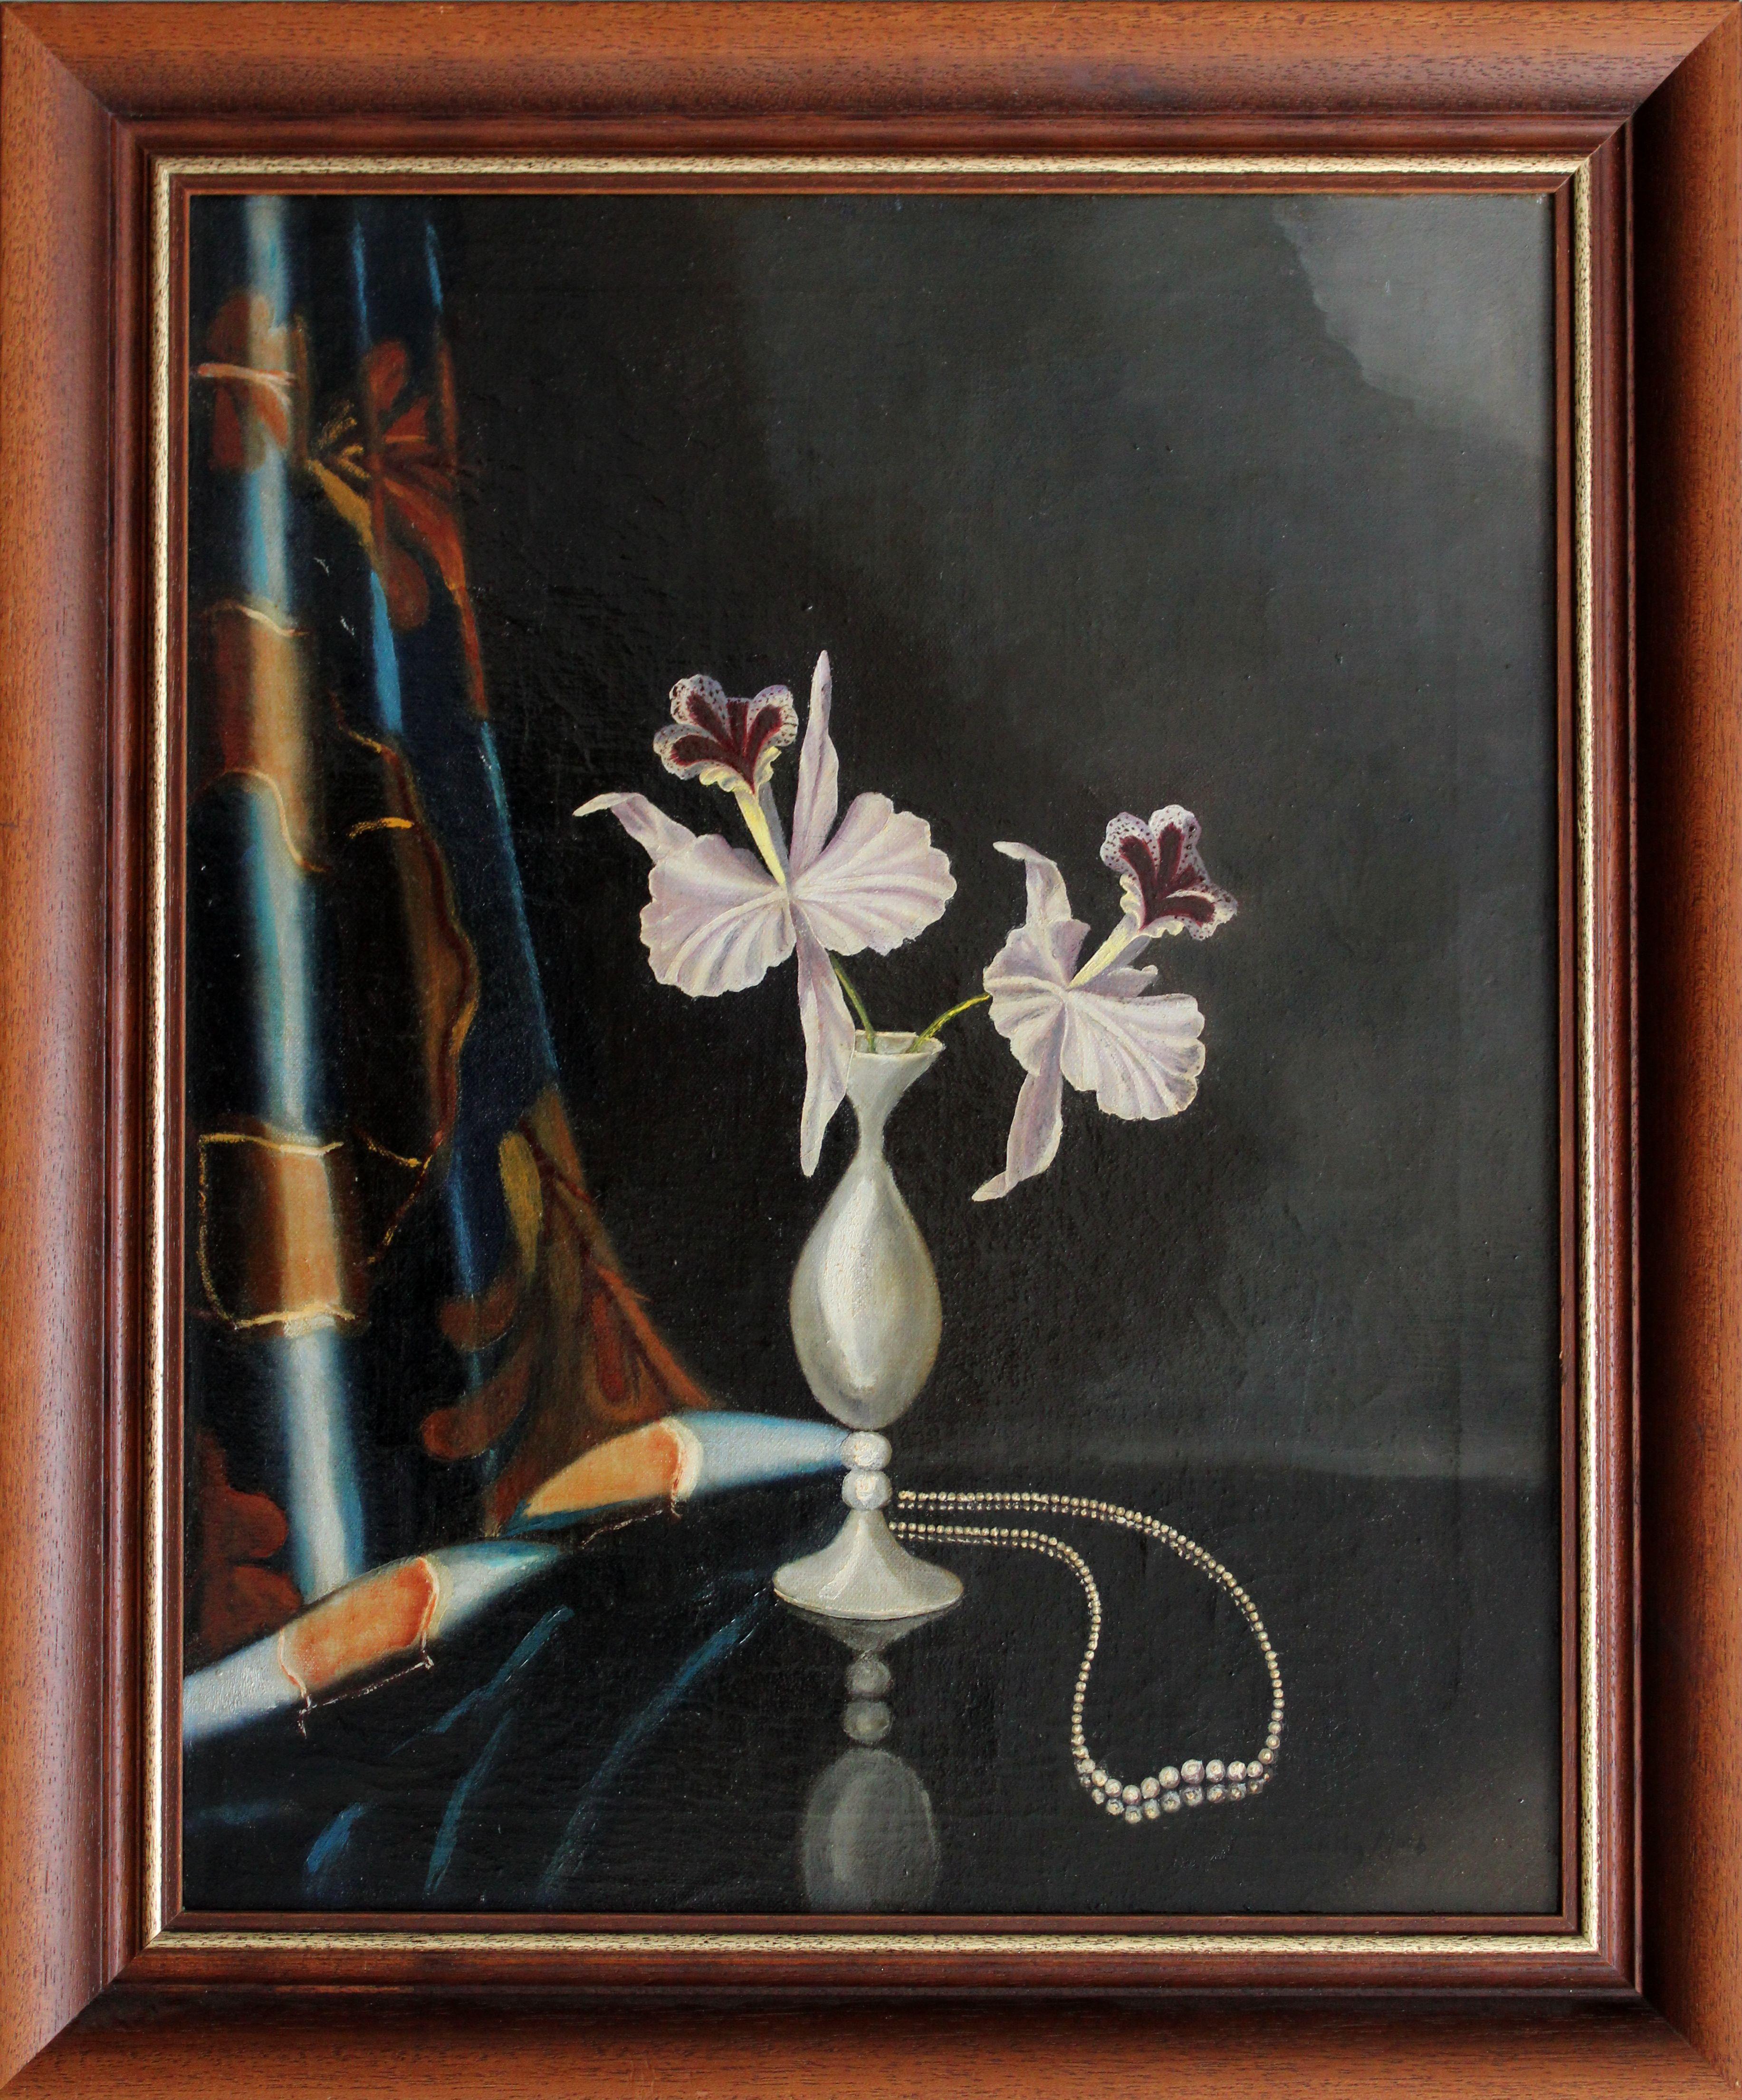 Still life with pearls. Oil on canvas, 50 x 40, 5 cm - Painting by Tilly Moes